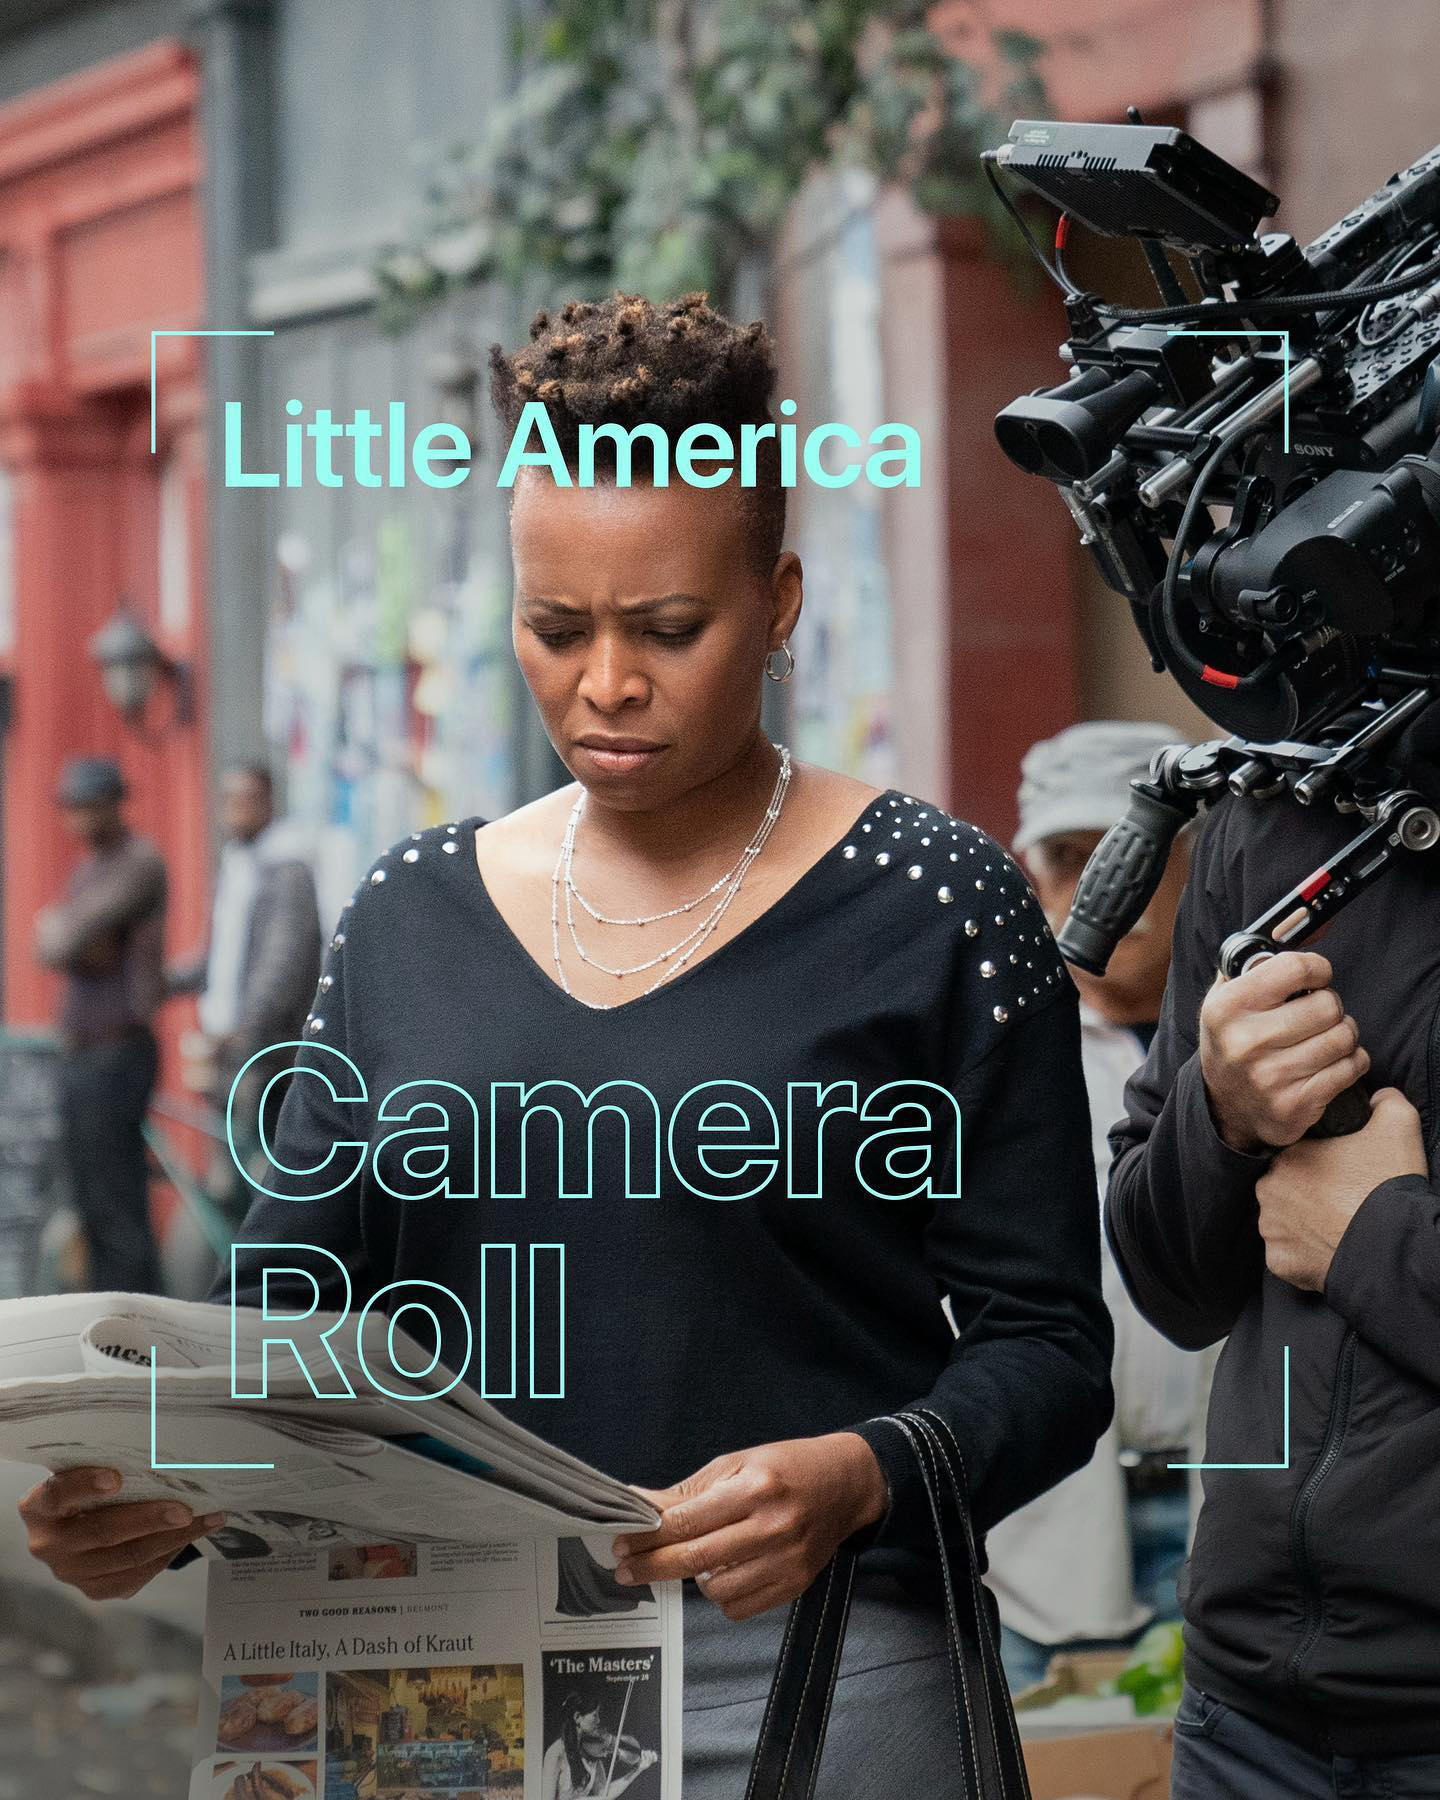 Apple TV+ - Most of the cast and crew for each episode of #LittleAmerica had cultural ties to the co